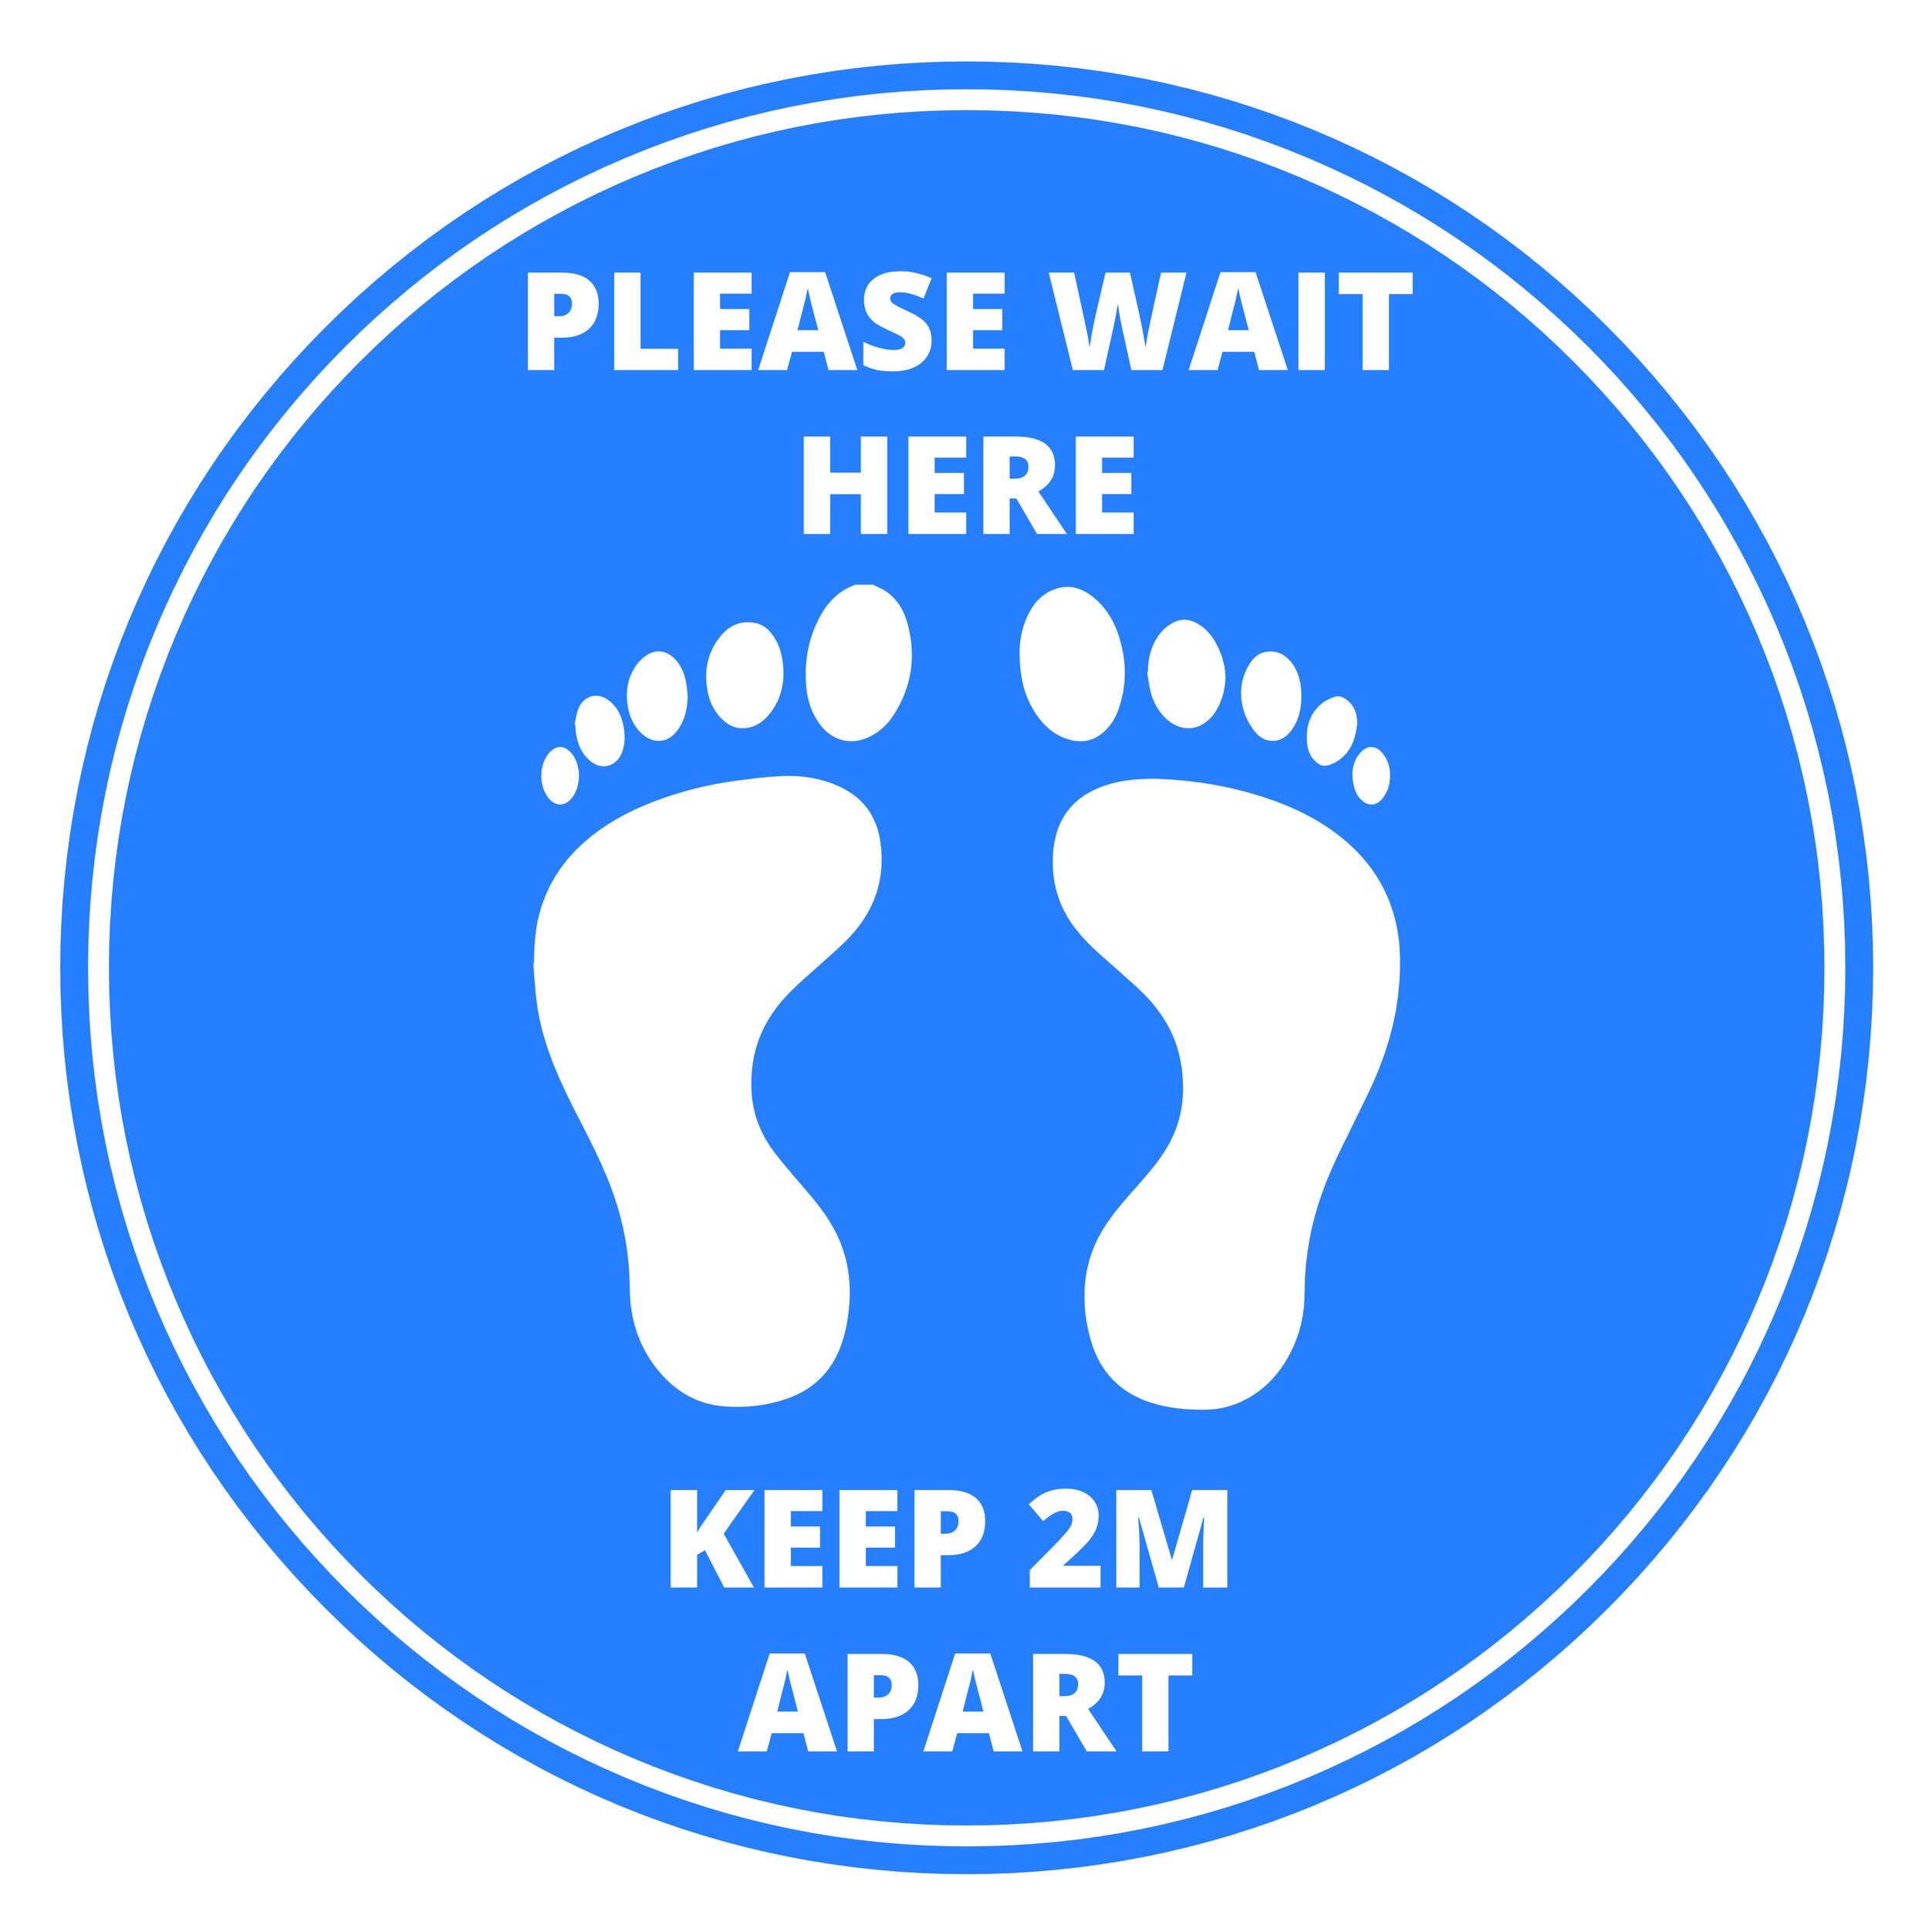 Social Distancing 2m Apart Self Adhesive Shop Floor Sticker All Sizes